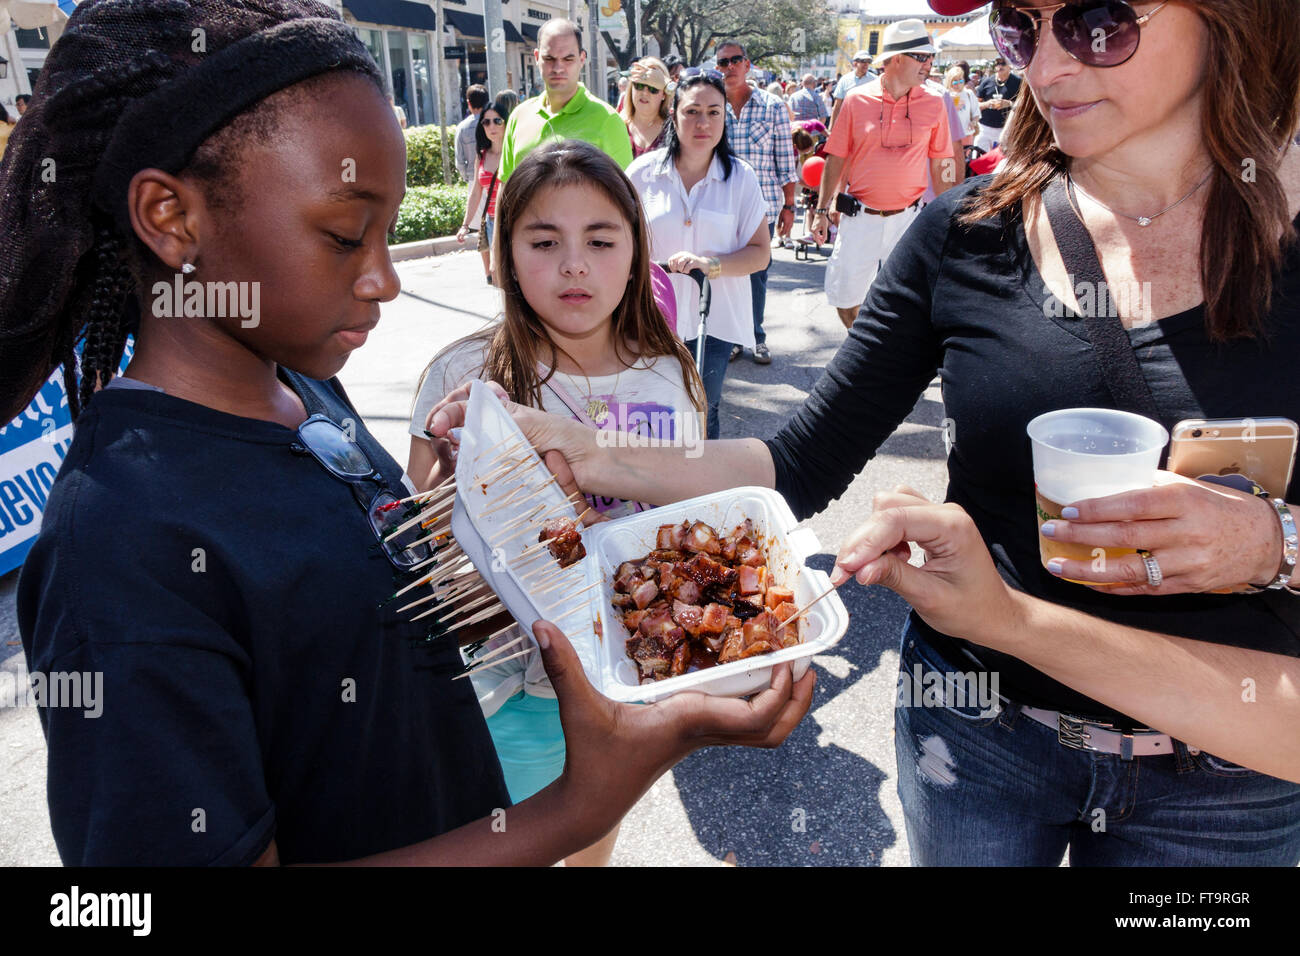 Miami Florida,Coral Gables,Carnaval Carnival Miracle Mile,street festival,annual celebration,Hispanic Black African Africans,girl girls,youngster,fema Stock Photo